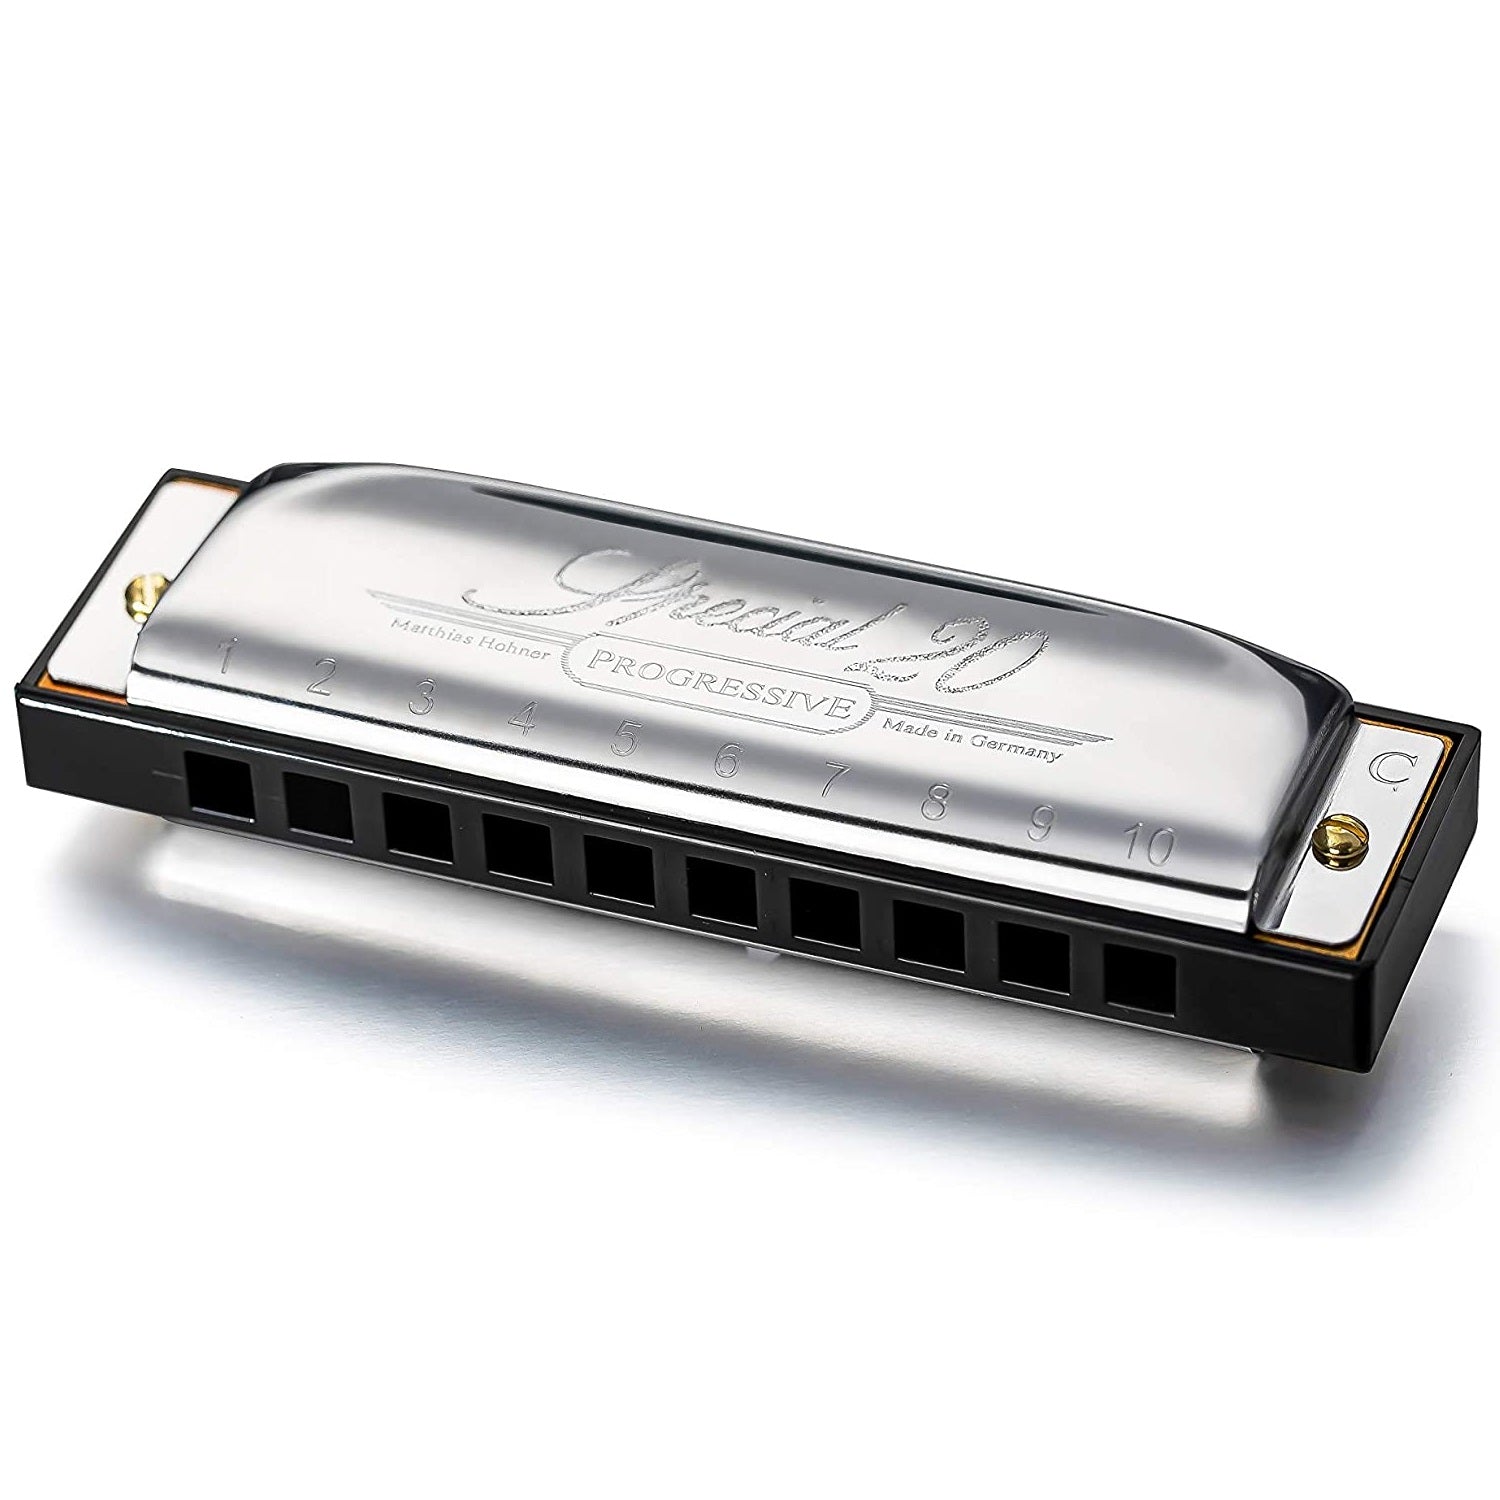 Special 20 Harmonica by Hohner – Key of C